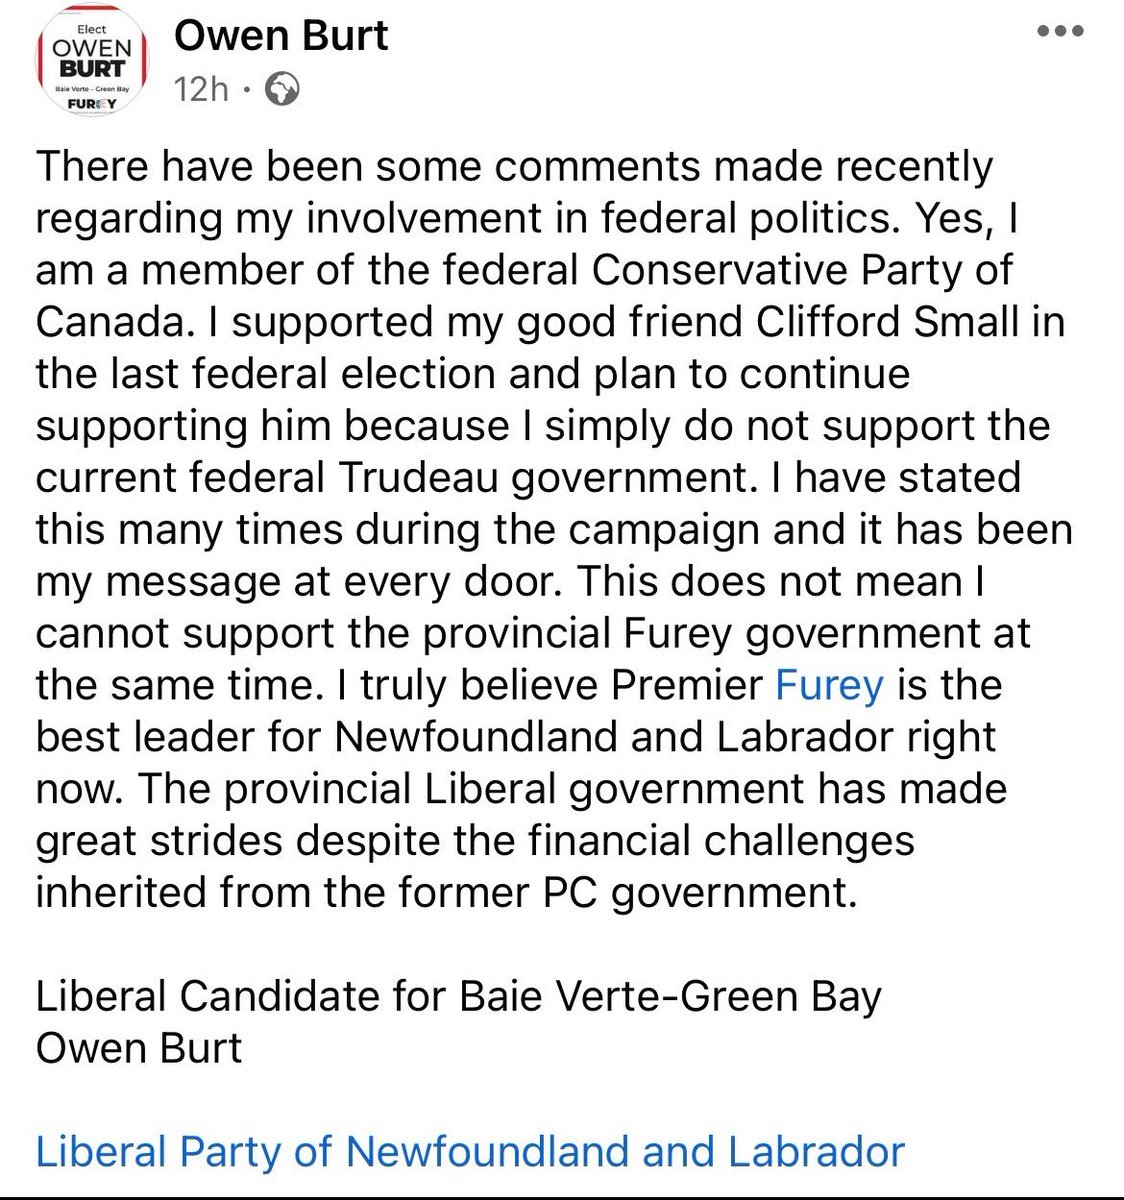 Amazing. The NL Liberal candidate for the Baie Verte-Green Bay provincial by-election is a Federal Conservative Party member. Could they really not find an actual Liberal to run for them? I'm pretty sure the PC party candidate is also a CPC member. Battle of the Conservatives!